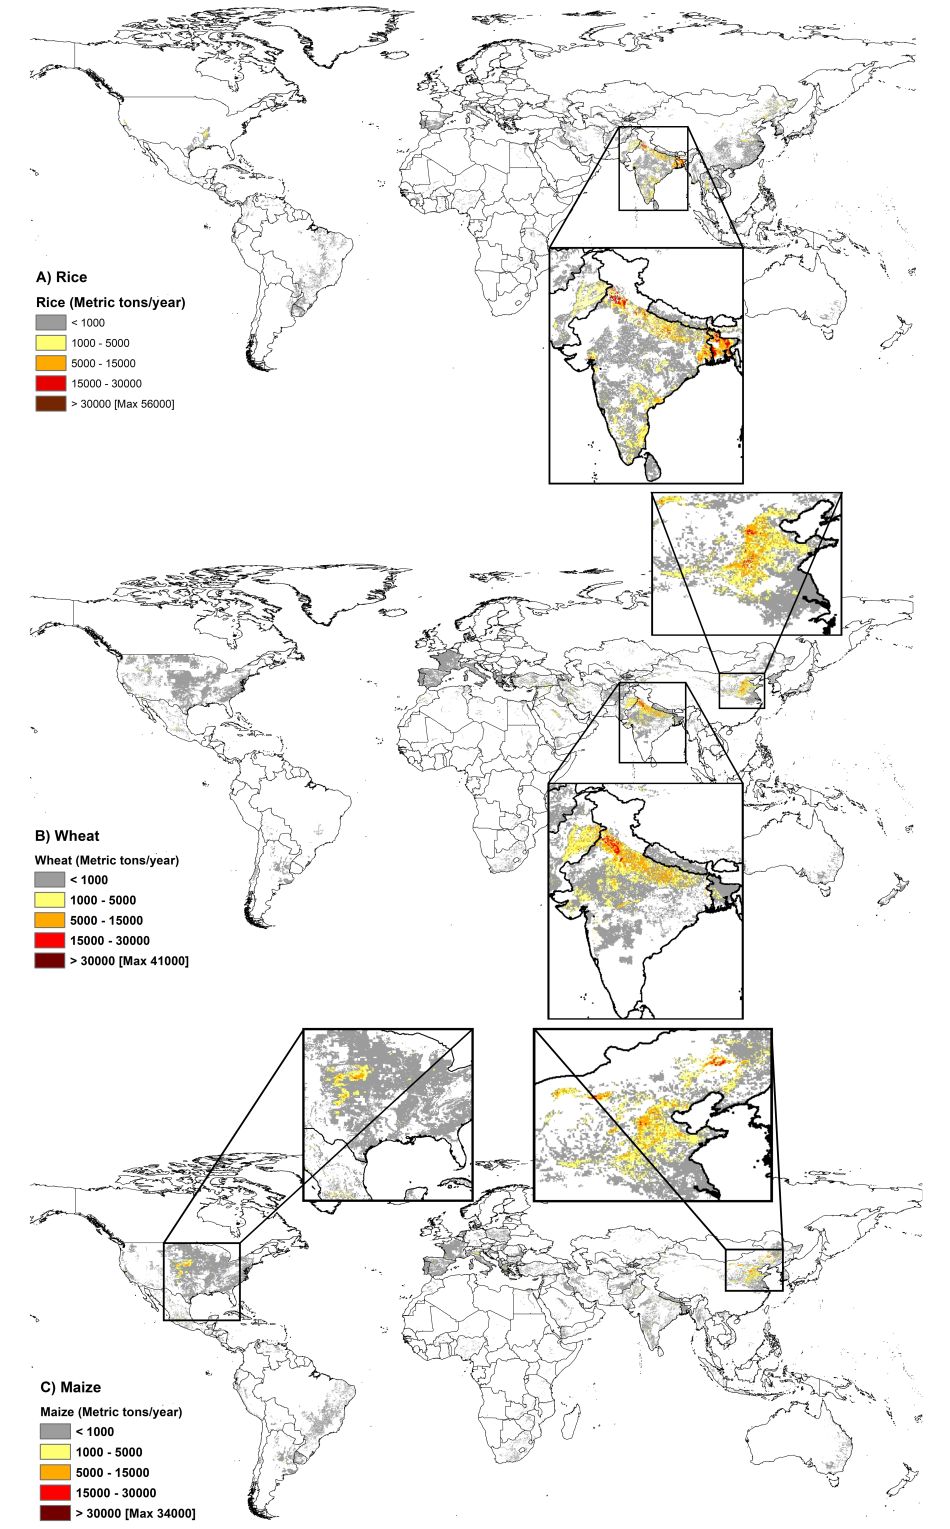 Global map of rice, wheat, and maize production from groundwater irrigation in high arsenic risk areas 